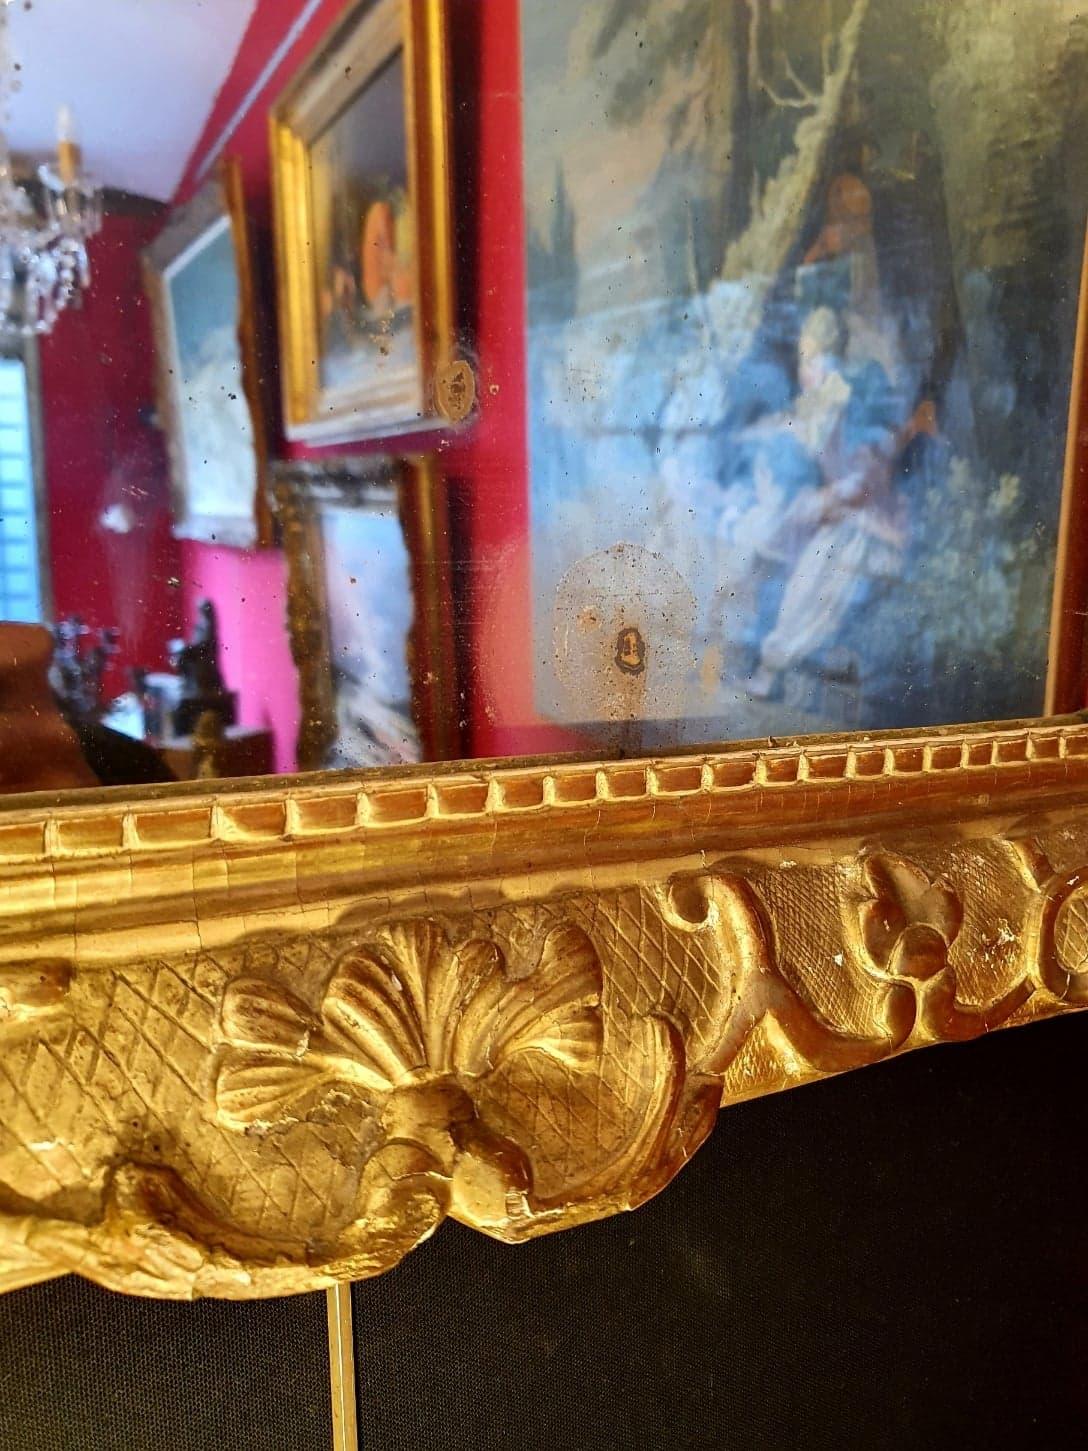 Regency Period Pediment Mirror, Floral Decorations, Golden Carved Wood, 18th For Sale 2